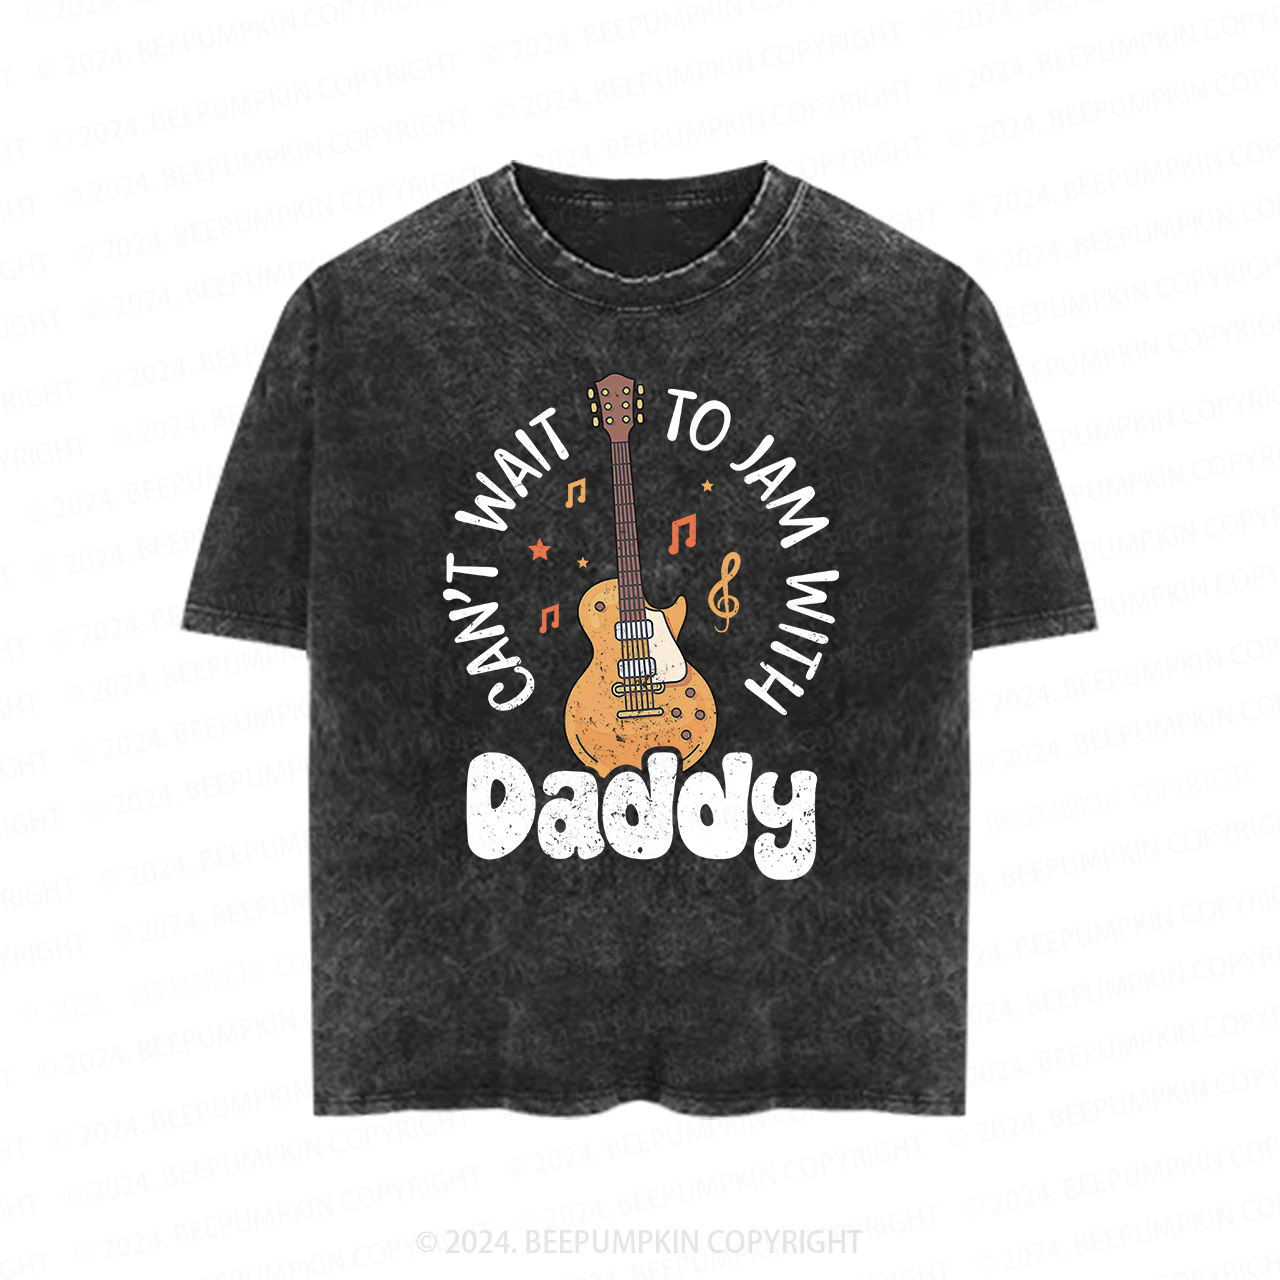 Can't Wait To Jam With Daddy Toddler&Kids Washed Tees